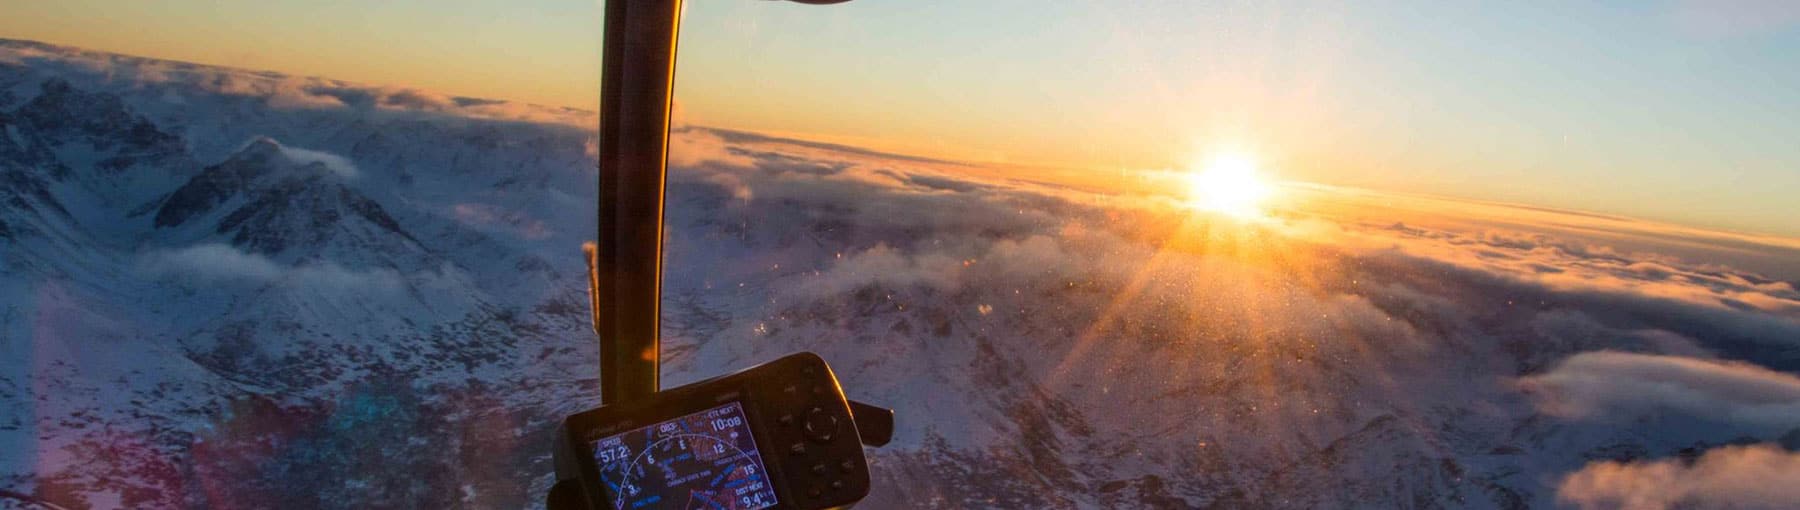 View from helicopter cockpit of sun breaking through the clouds on the horizon with snowy mountain foreground.